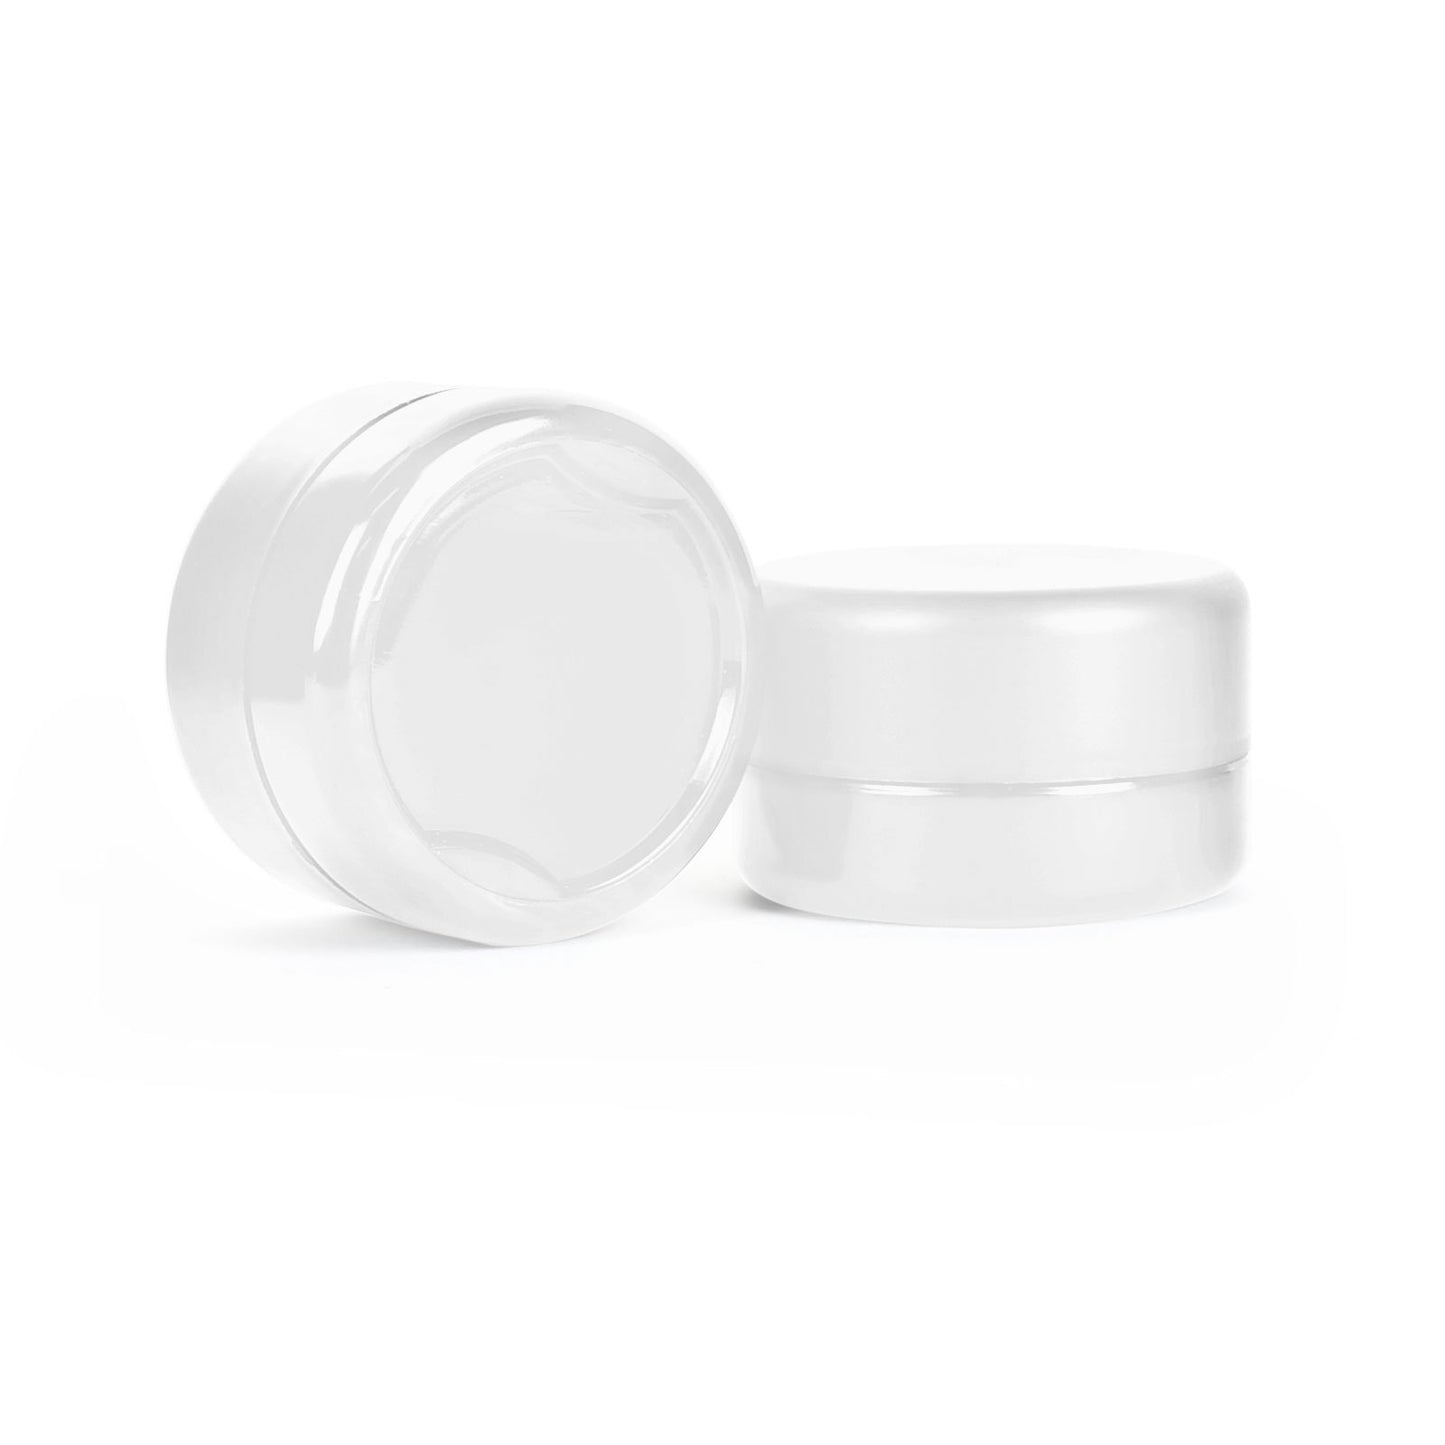 9ml Child Resistant White Glass Jar with White Cap 2 Gram 320 COUNT